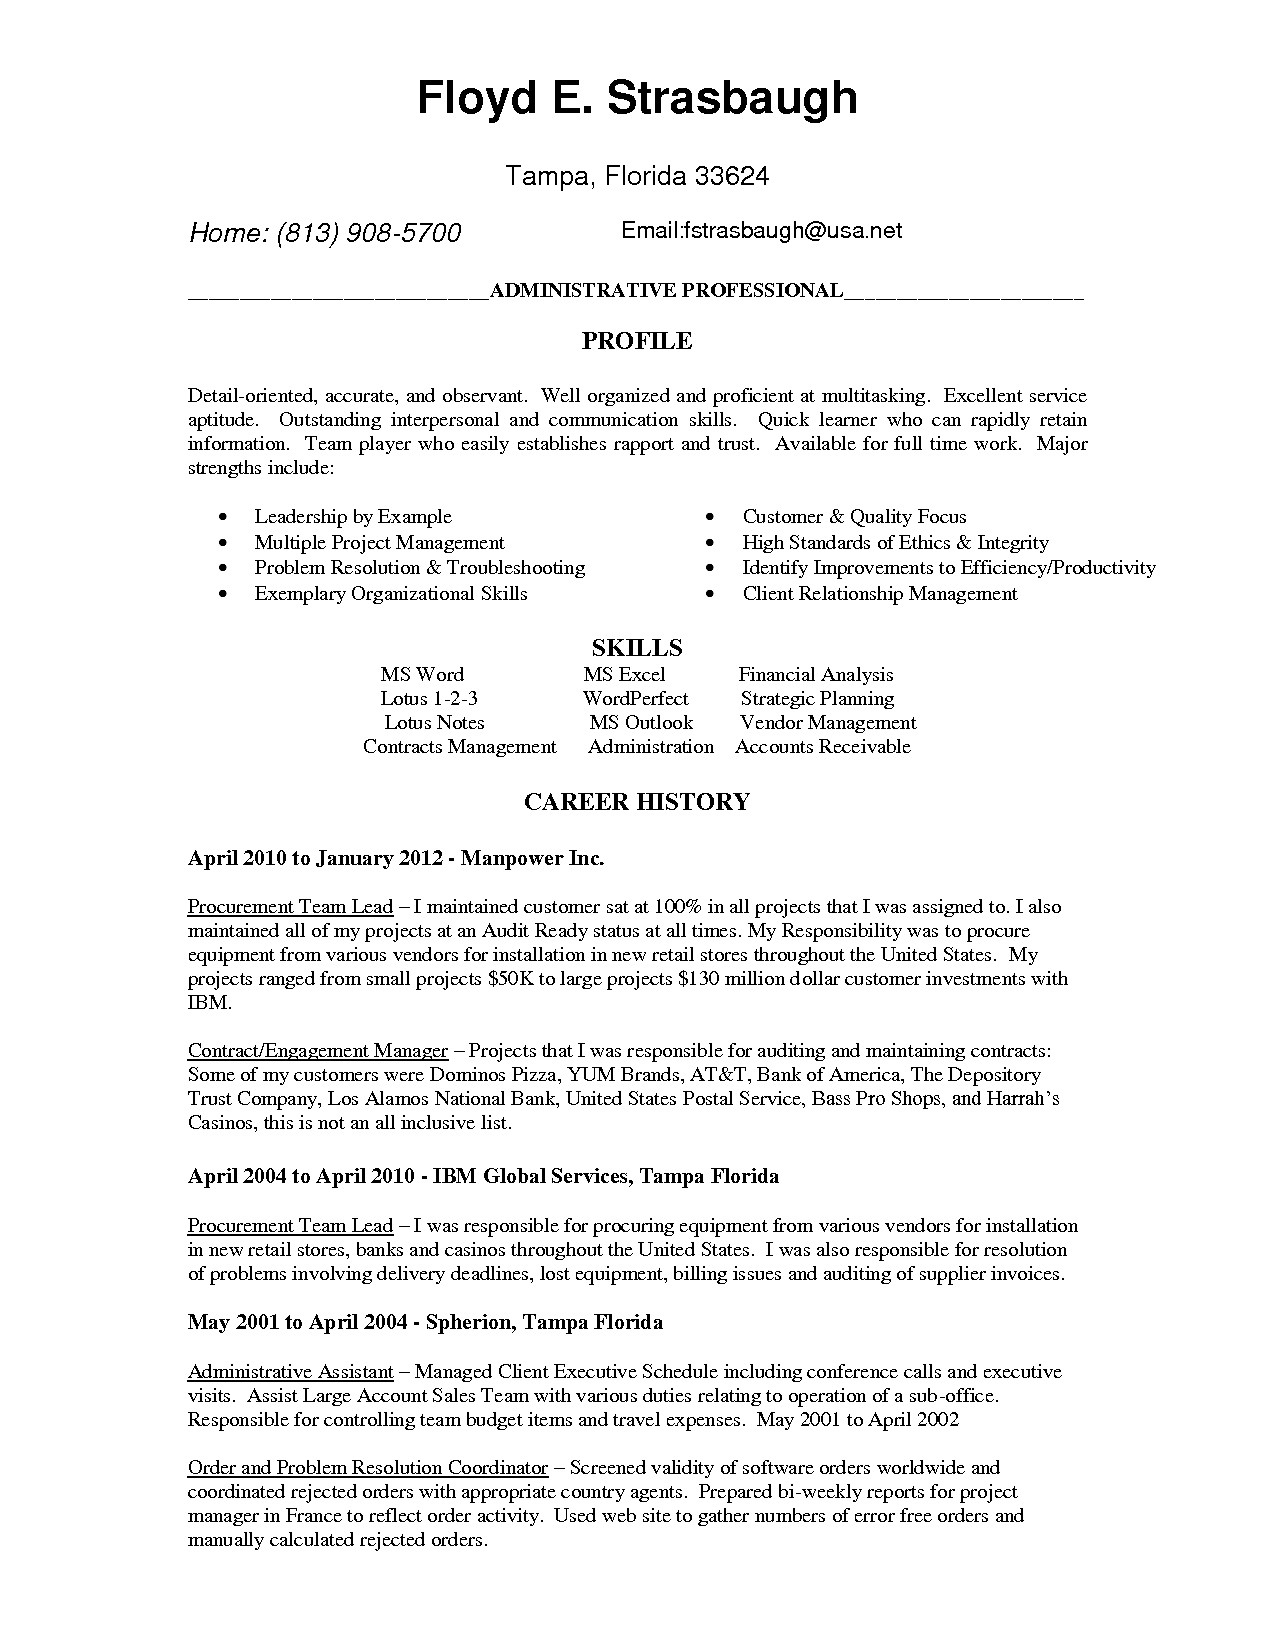 will serve letter template example-Sample Cover Letter for Finance Executive Position Valid Sample Resume Headlines 25 Professional Job Resume Template 10-k